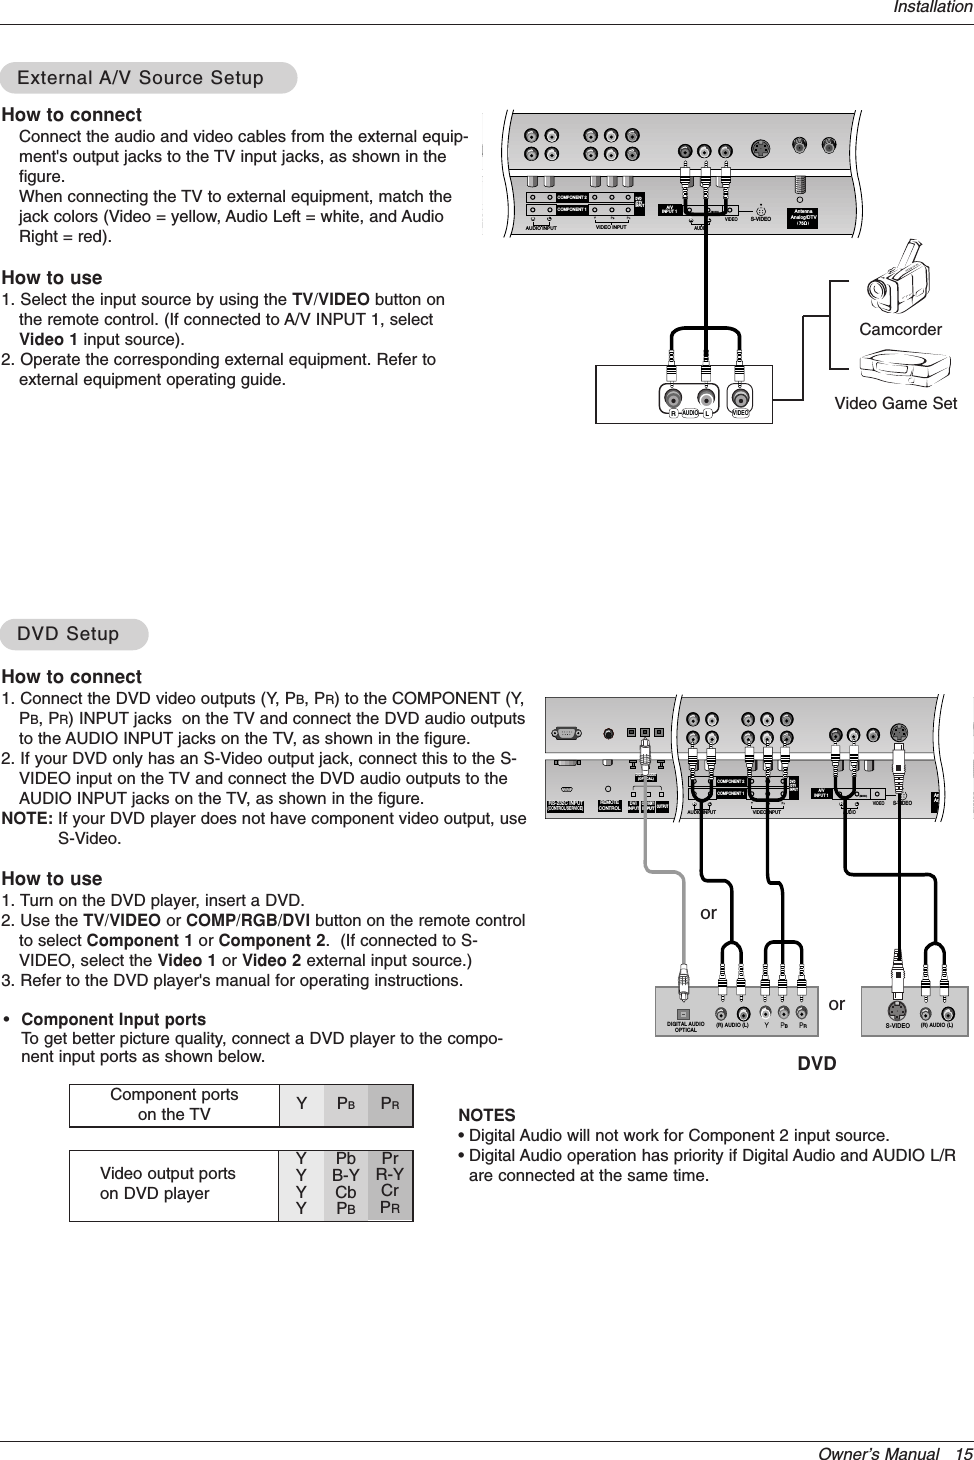 Owner’s Manual   15Installation•Component Input portsTo get better picture quality, connect a DVD player to the compo-nent input ports as shown below.How to connectConnect the audio and video cables from the external equip-ment&apos;s output jacks to the TV input jacks, as shown in thefigure. When connecting the TV to external equipment, match thejack colors (Video = yellow, Audio Left = white, and AudioRight = red).How to use1. Select the input source by using the TV/VIDEO button onthe remote control. (If connected to A/V INPUT 1, selectVideo 1 input source).2. Operate the corresponding external equipment. Refer toexternal equipment operating guide.Component ports on the TV Y PBPRVideo output ports on DVD playerYYYYPbB-YCbPBPrR-YCrPRHow to connect1. Connect the DVD video outputs (Y, PB, PR) to the COMPONENT (Y,PB, PR) INPUT jacks  on the TV and connect the DVD audio outputsto the AUDIO INPUT jacks on the TV, as shown in the figure.2. If your DVD only has an S-Video output jack, connect this to the S-VIDEO input on the TV and connect the DVD audio outputs to theAUDIO INPUT jacks on the TV, as shown in the figure.NOTE: If your DVD player does not have component video output, useS-Video.How to use1. Turn on the DVD player, insert a DVD.2. Use the TV/VIDEO or COMP/RGB/DVI button on the remote controlto select Component 1 or Component 2.  (If connected to S-VIDEO, select the Video 1 or Video 2 external input source.)3. Refer to the DVD player&apos;s manual for operating instructions.External External A/V Source SetupA/V Source SetupDVD SetupDVD SetupRLAUDIO VIDEOAC INPUTAUDIO INPUTCOMPONENT 2COMPONENT 1RLNPUTTV INPUT)VIDEO INPUTA/VINPUT 1(MONO)VIDEO   Antenna  Analog/DTVS-VIDEODVD/DTVINPUTAUDIOR LREMOTECONTROLRS-232C INPUT(CONTROL/SERVICE)AUDIO INPUTCOMPONENT 2COMPONENT 1RLDIGITAL AUDIO(OPTICAL)DVI INPUTCOMPONENT1 INPUTOUTPUTVIDEO INPUTA/VINPUT 1(MONO)VIDEOAntenna  1Analog/DTVAnte      DBR(R) AUDIO (L)DIGITAL AUDIOOPTICAL (R) AUDIO (L)S-VIDEOS-VIDEODVD/DTVINPUTAUDIOR LDVDorCamcorderVideo Game SetNOTES• Digital Audio will not work for Component 2 input source.• Digital Audio operation has priority if Digital Audio and AUDIO L/Rare connected at the same time.or